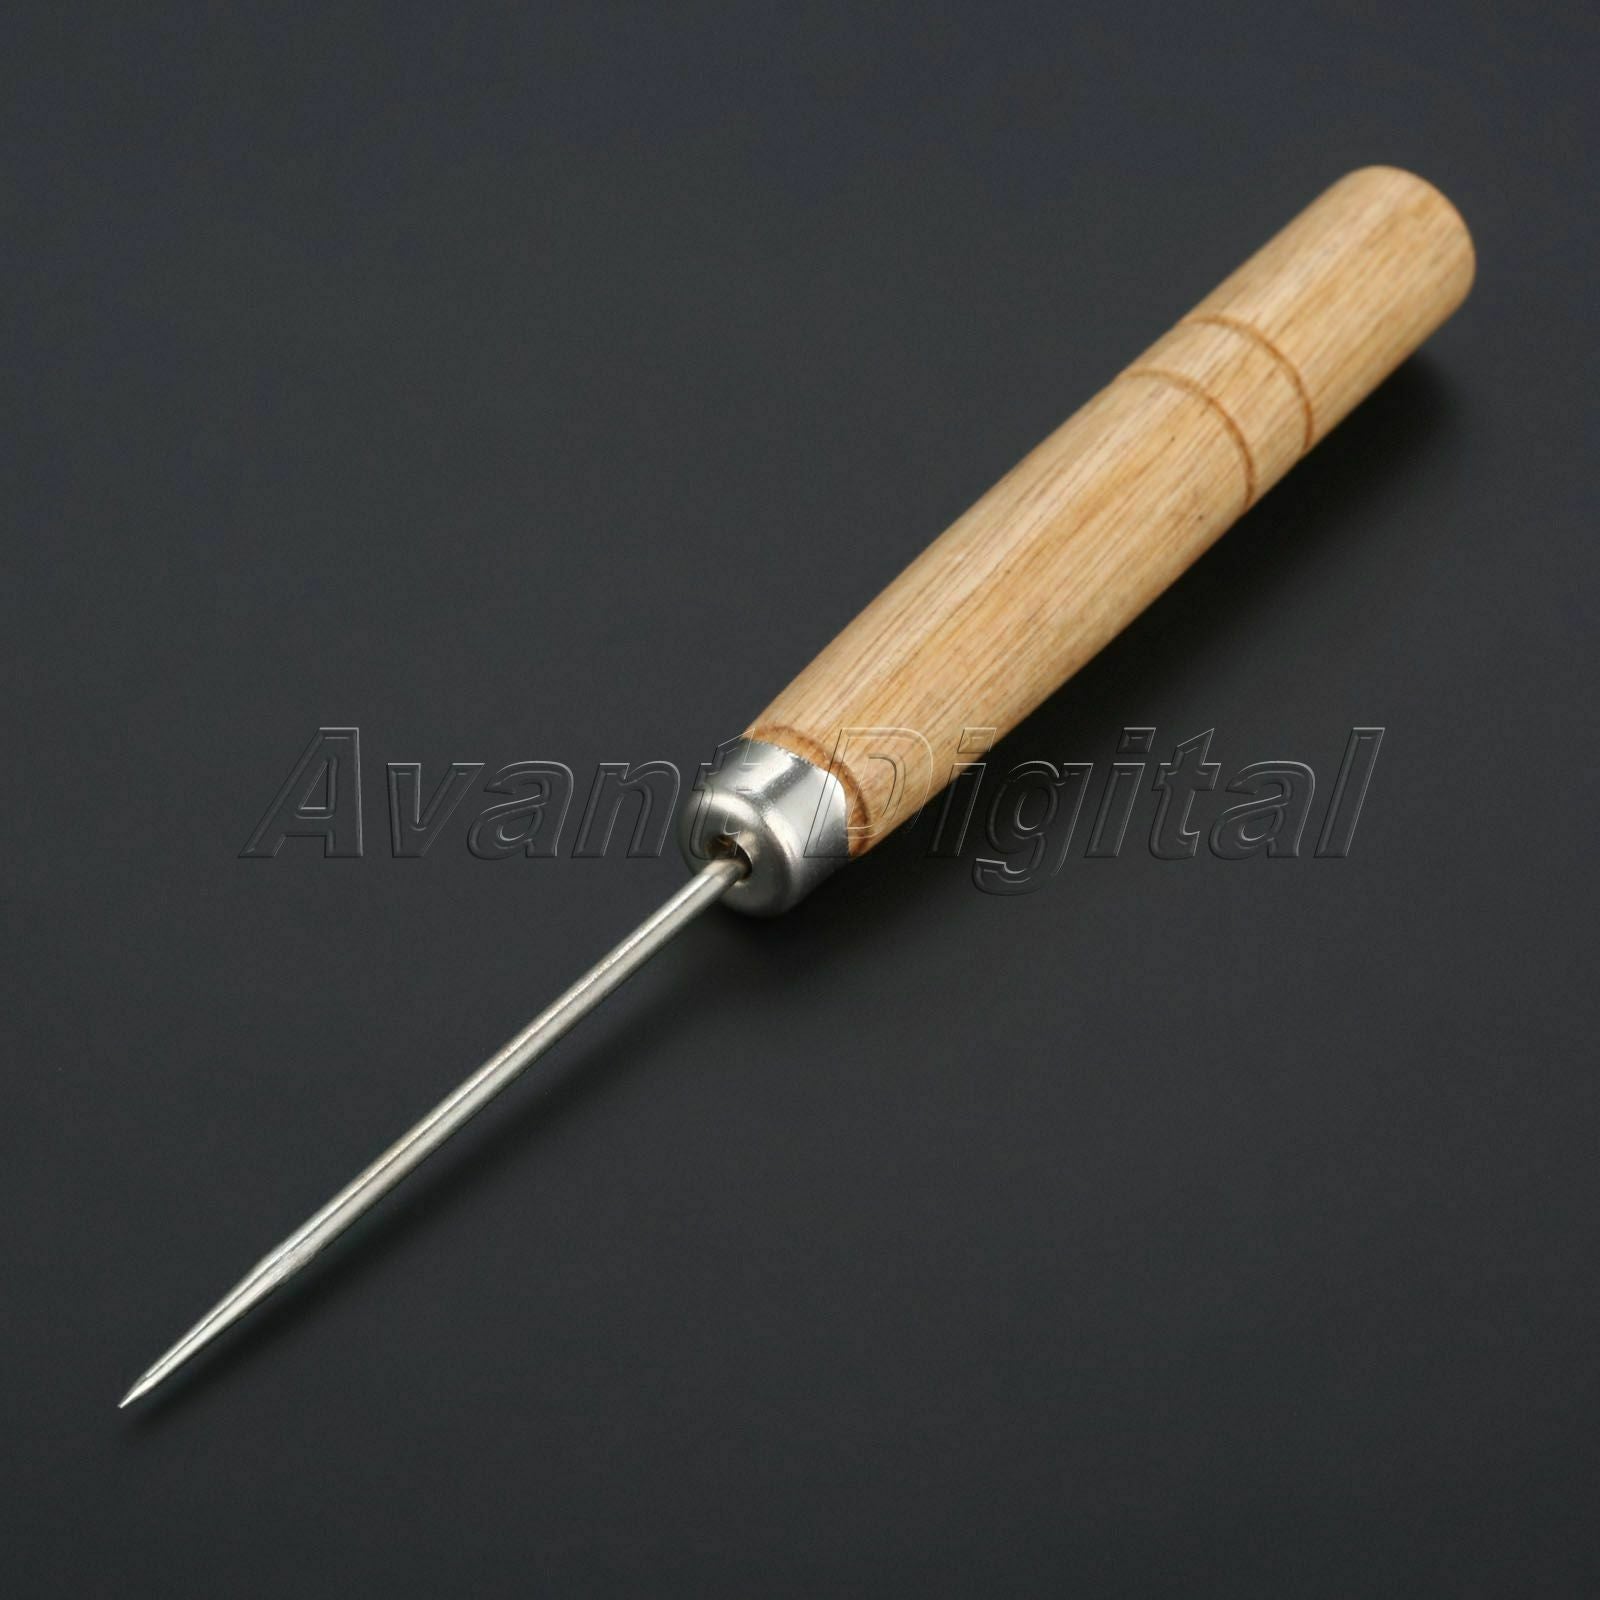 140mm Wooden Handle Sewing Awls Leather Punch Repair Stitching Clicker Tool 5Pcs